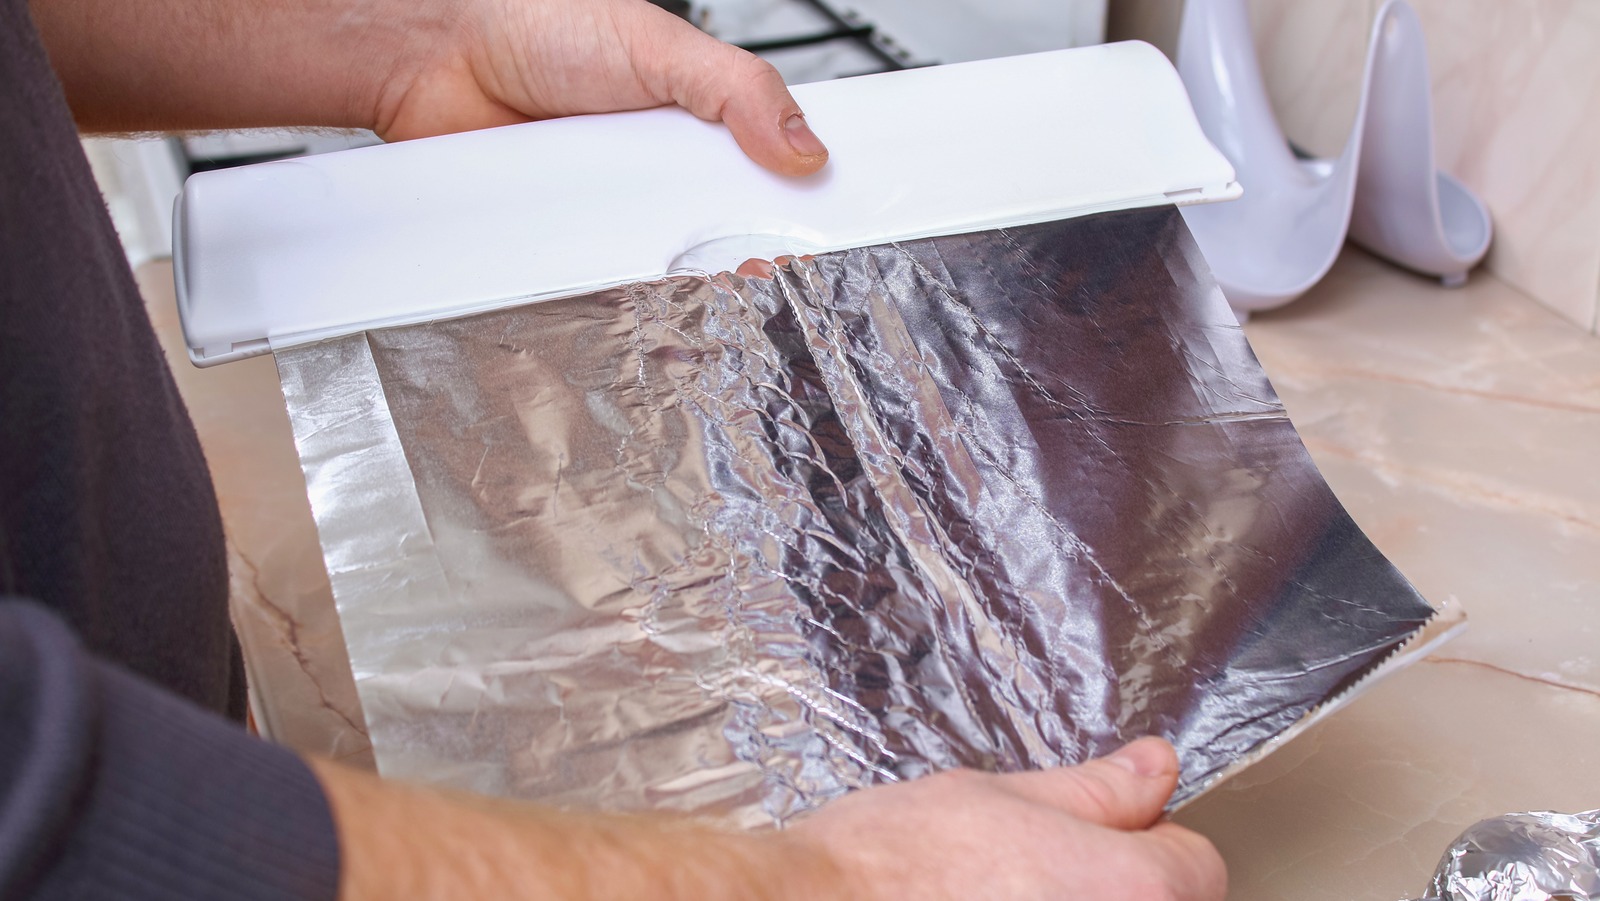 https://www.housedigest.com/img/gallery/mistakes-you-should-avoid-making-with-aluminum-foil/l-intro-1692977145.jpg